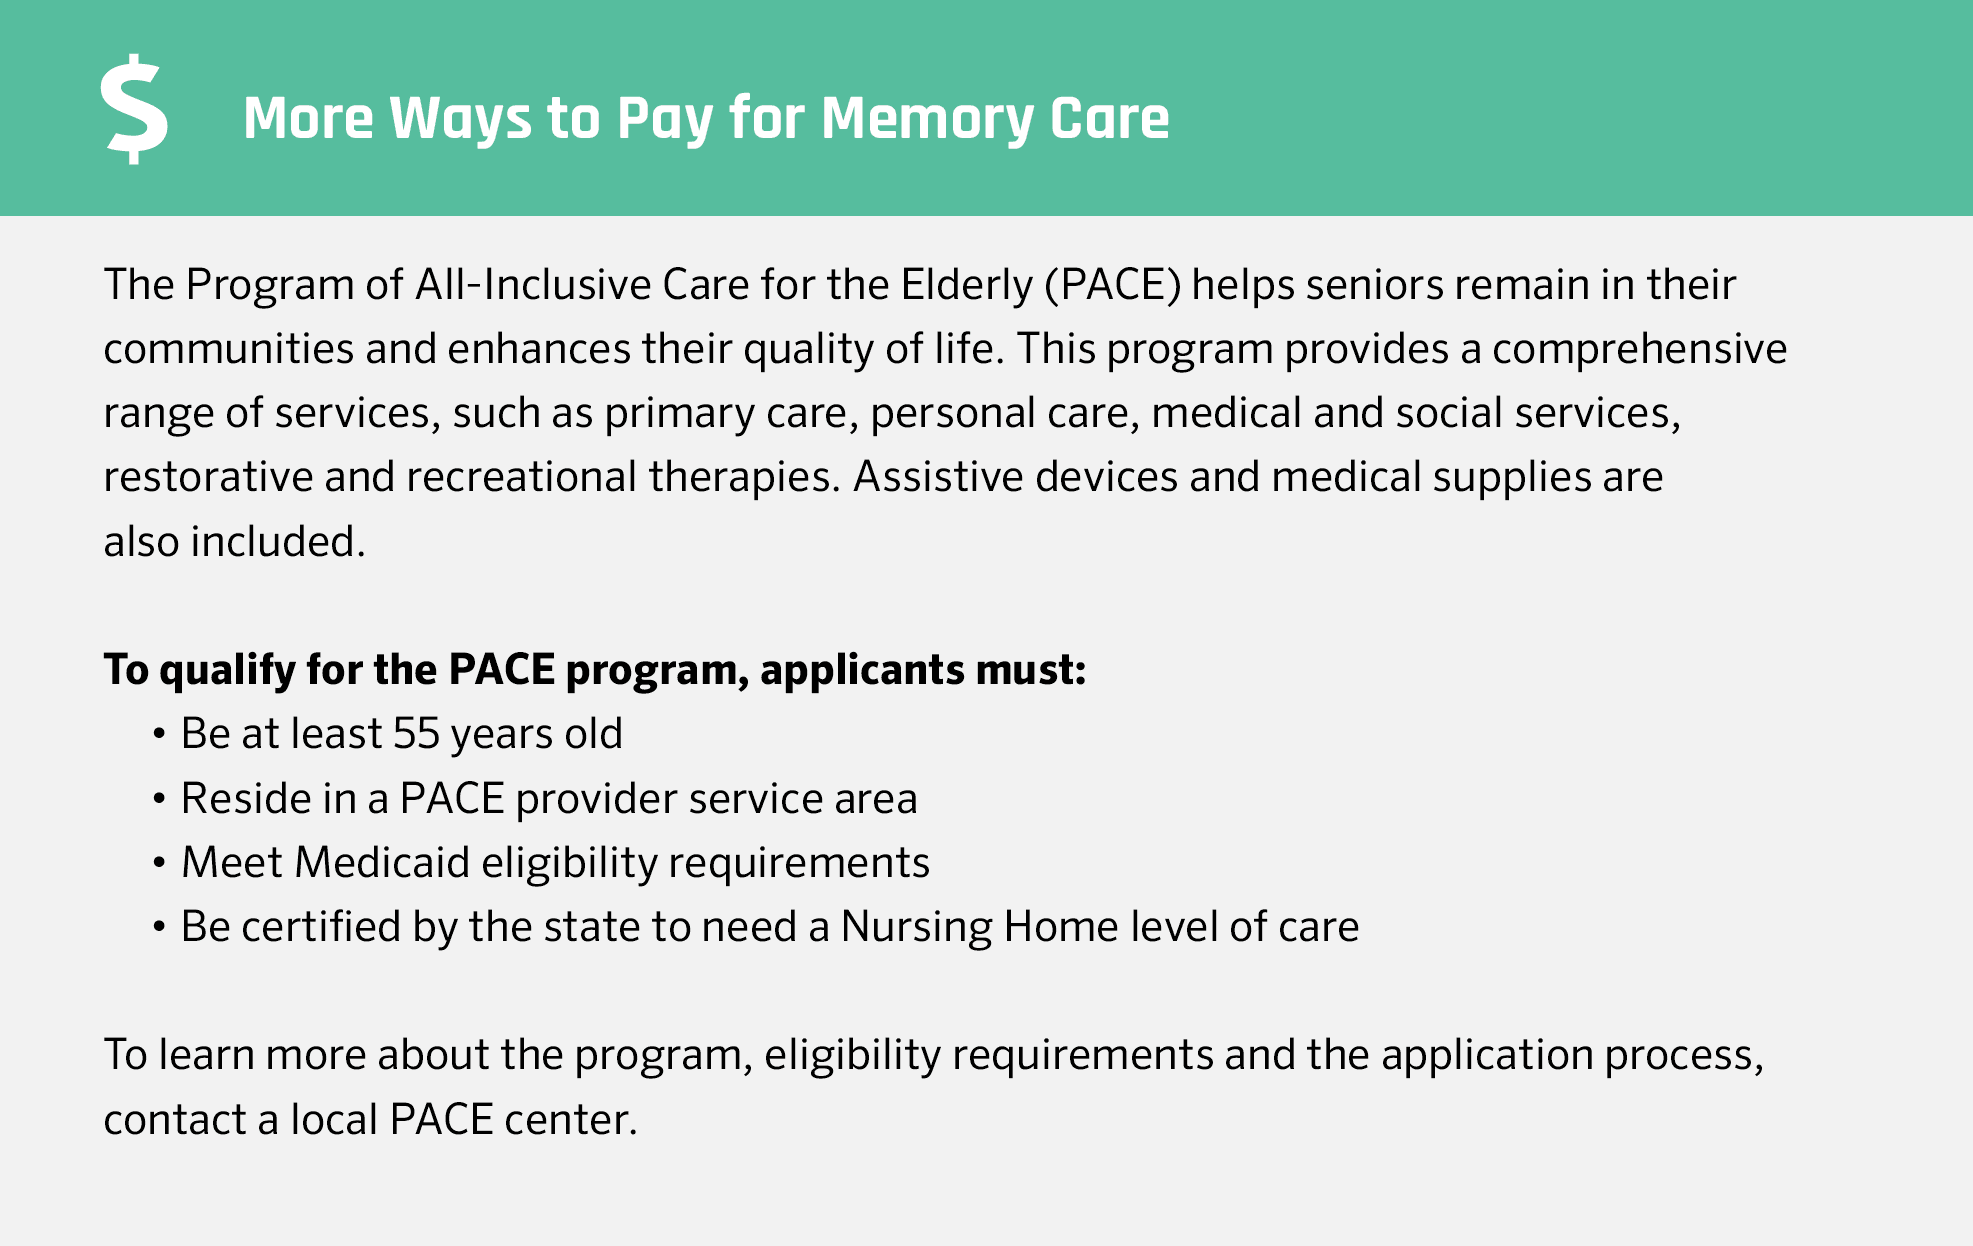 More Ways to Pay for Memory Care in Louisiana